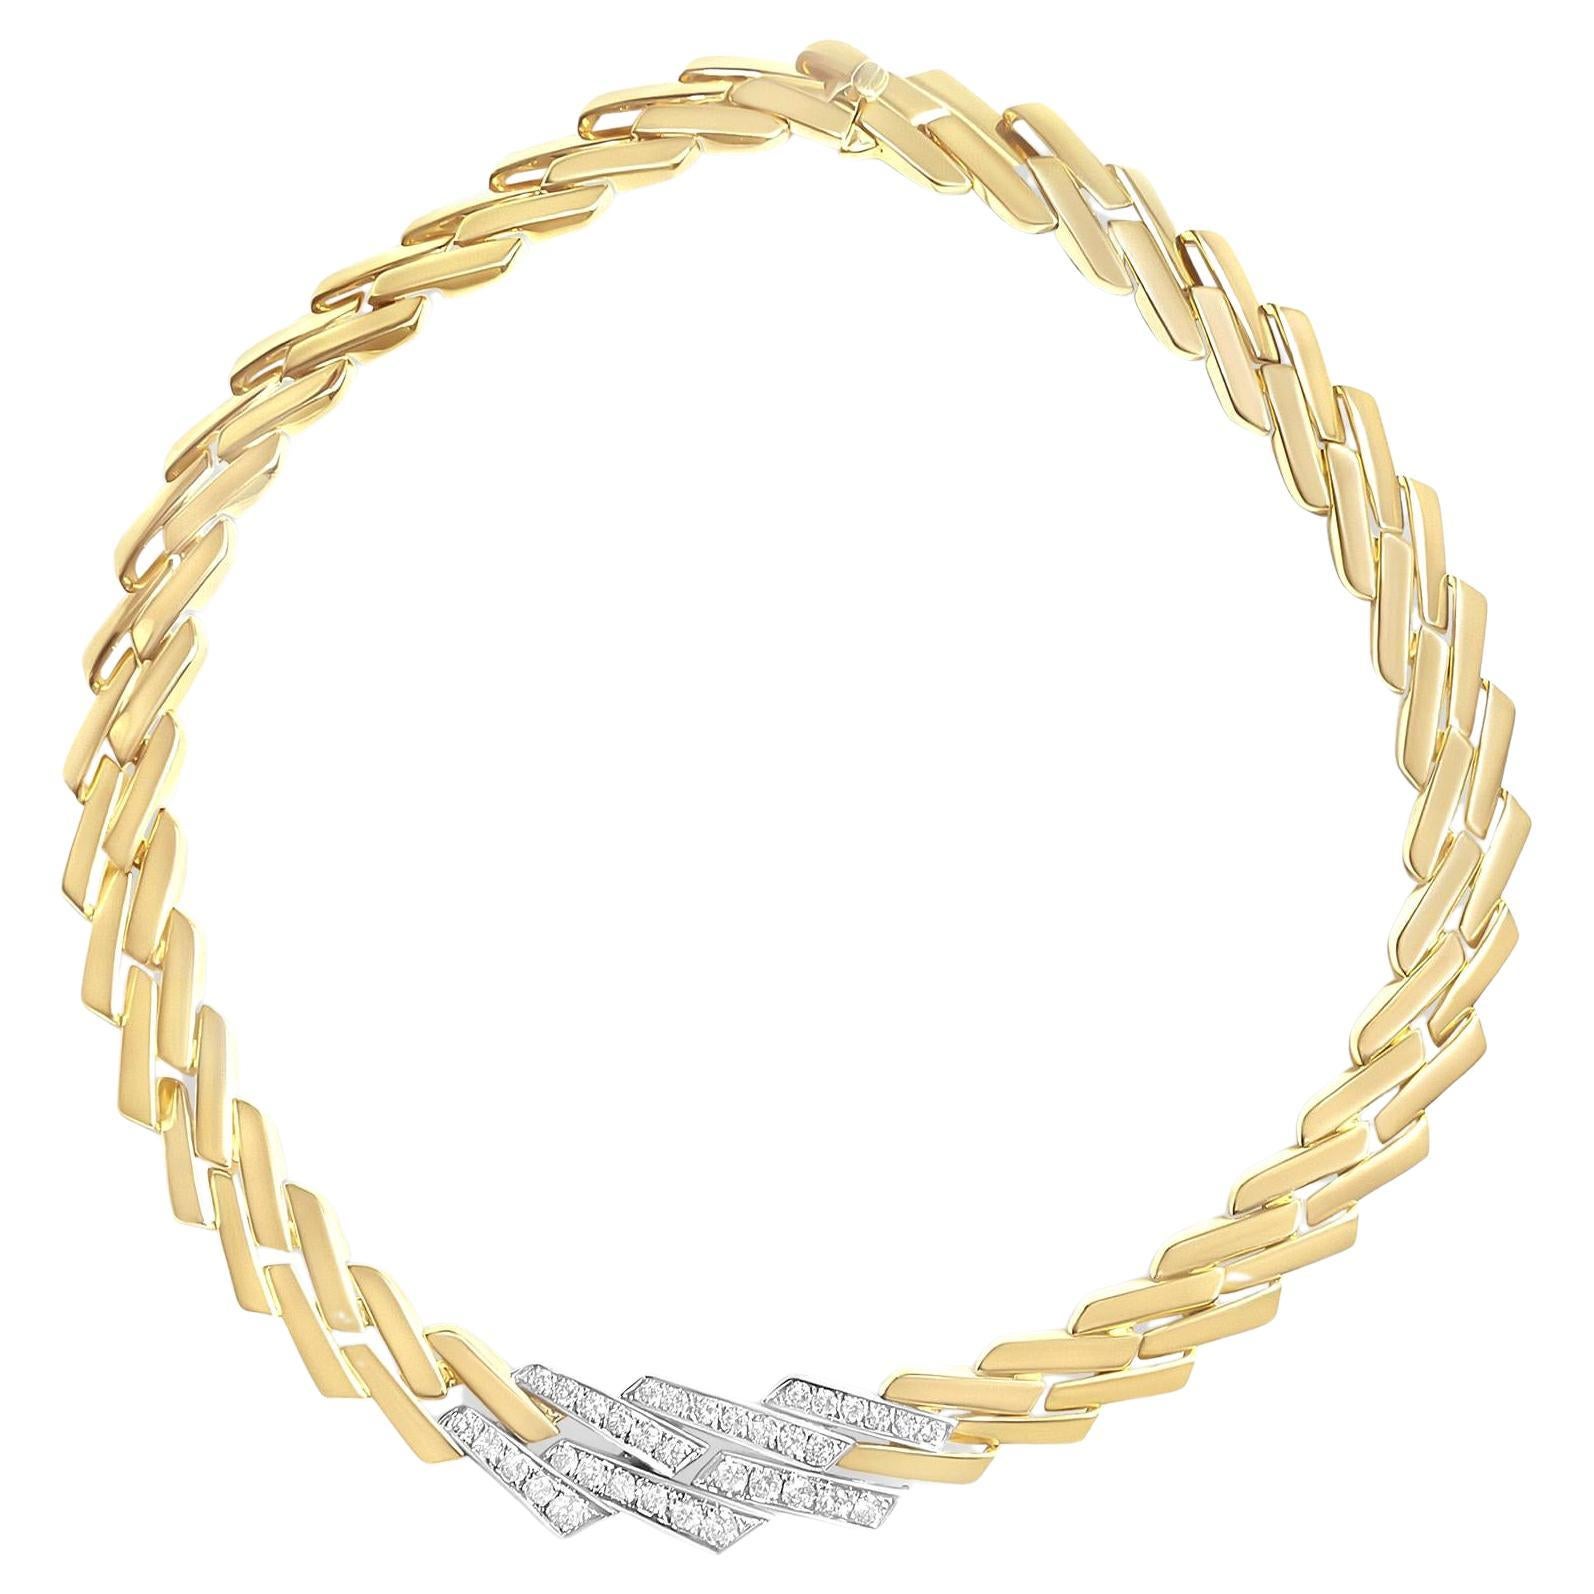 Cuban Curb Link Chain Necklace With Diamonds 2.75 Carats 14K Yellow Gold